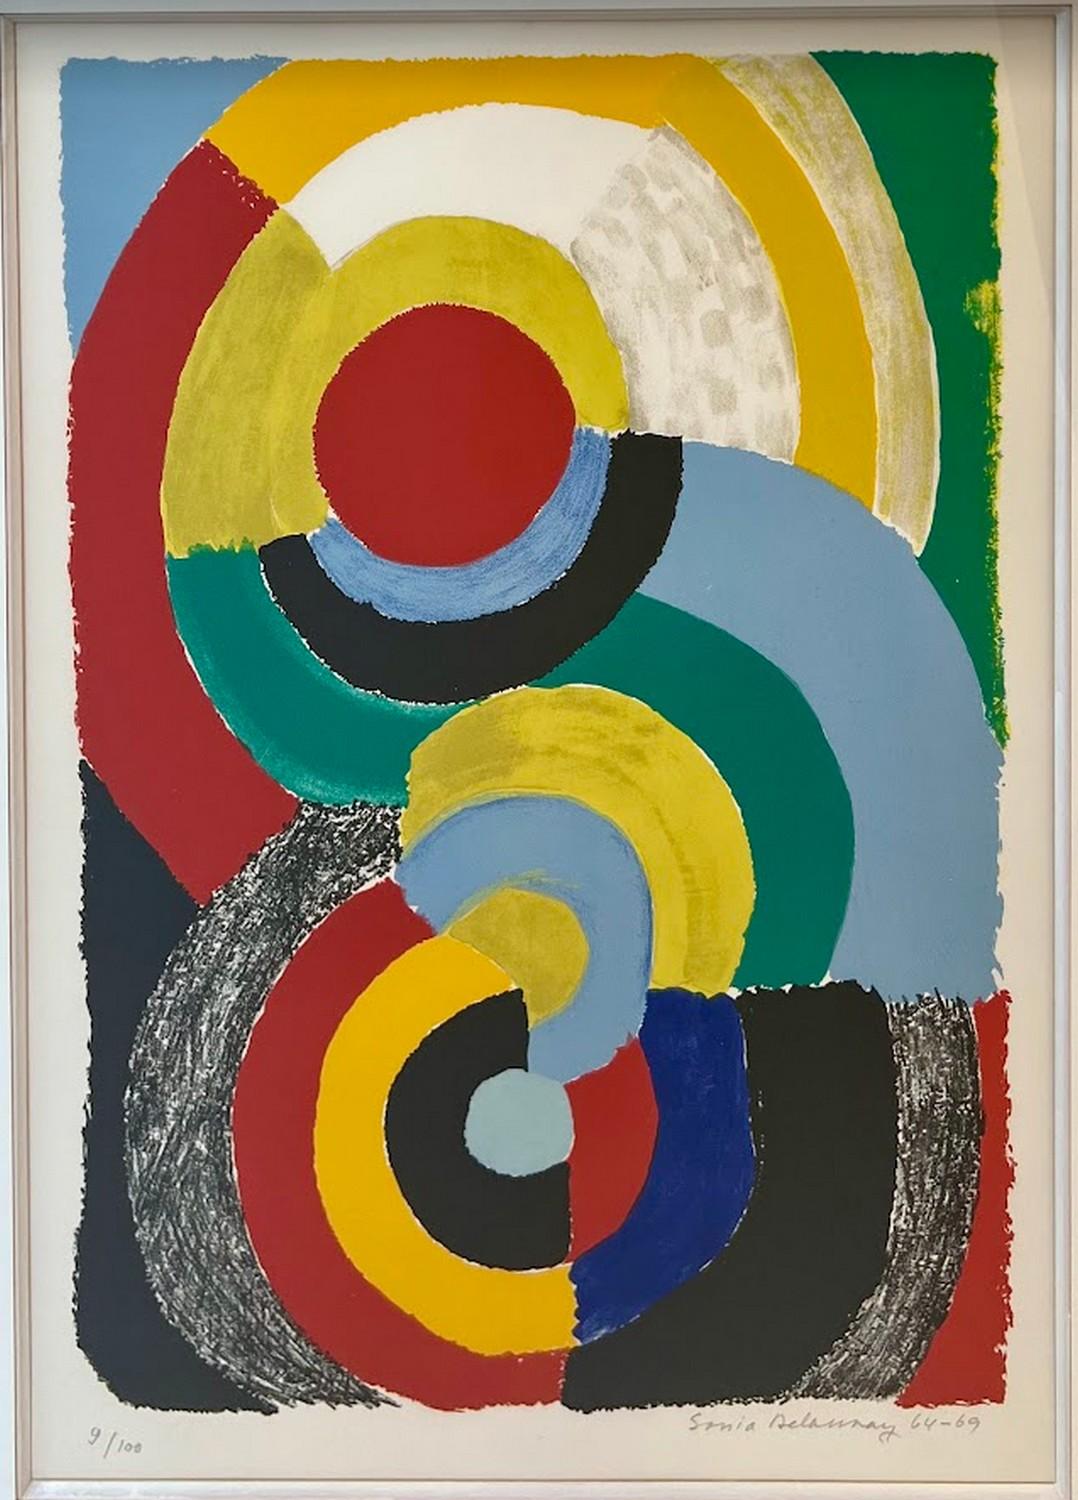 Sonia Delaunay Abstract Print - Rencontre 